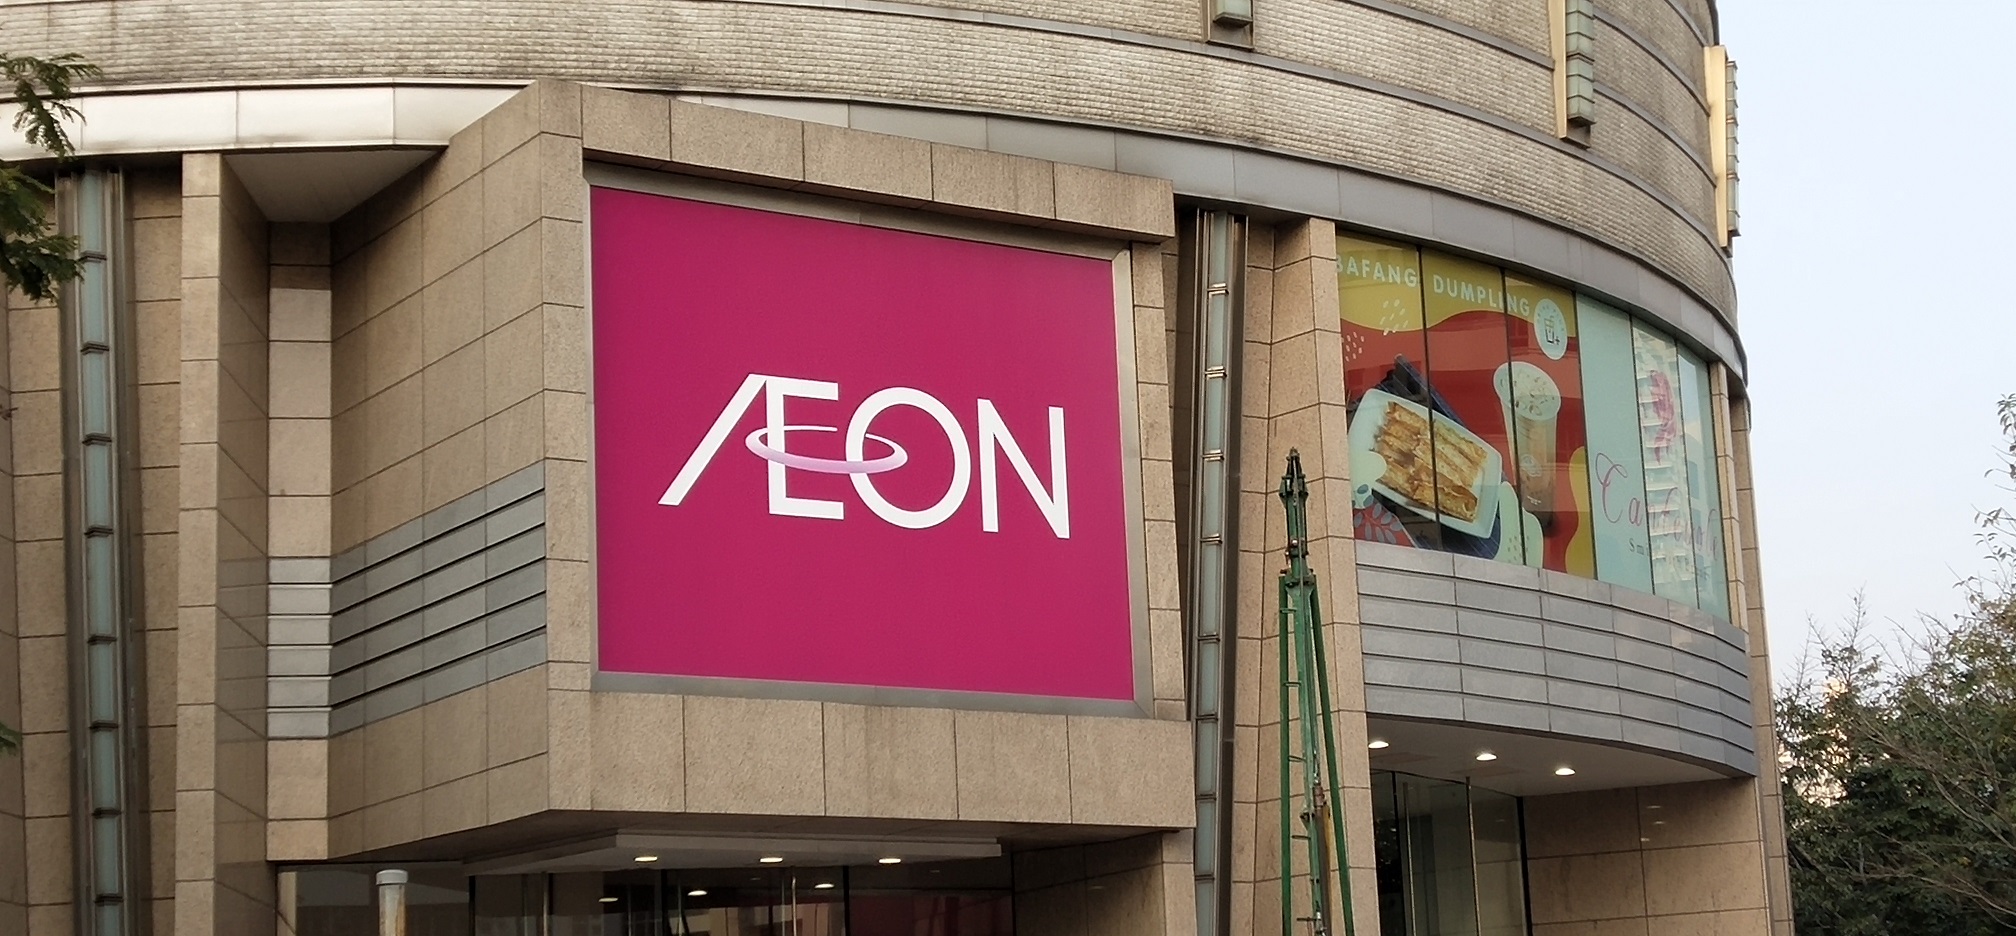 AEON Department Store serves the nearby public housing estates and private residential housings, i.e. West Kowloon Four Little Dragons